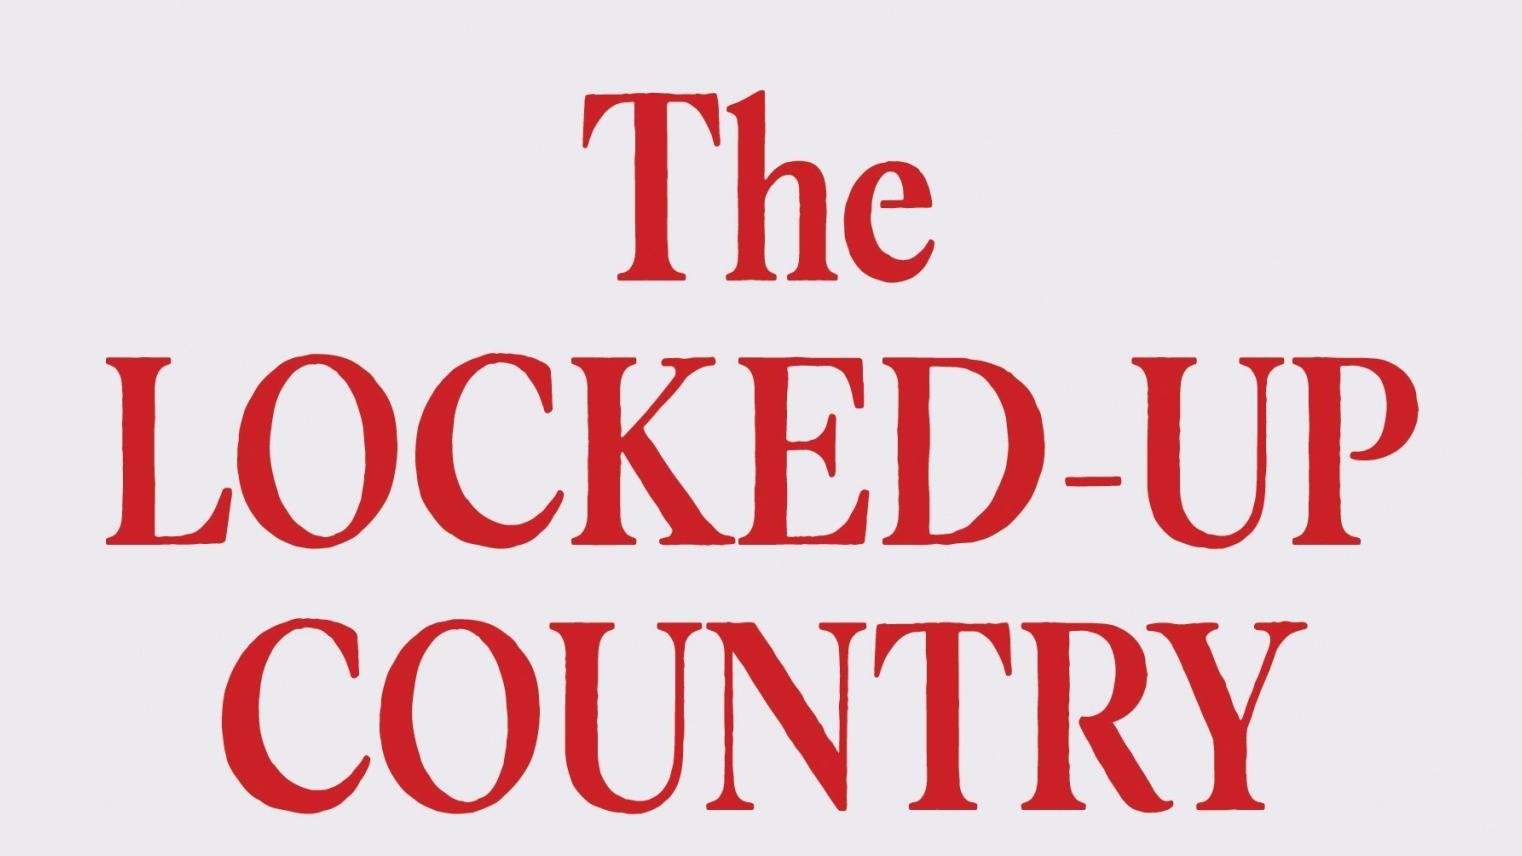 The locked-up country